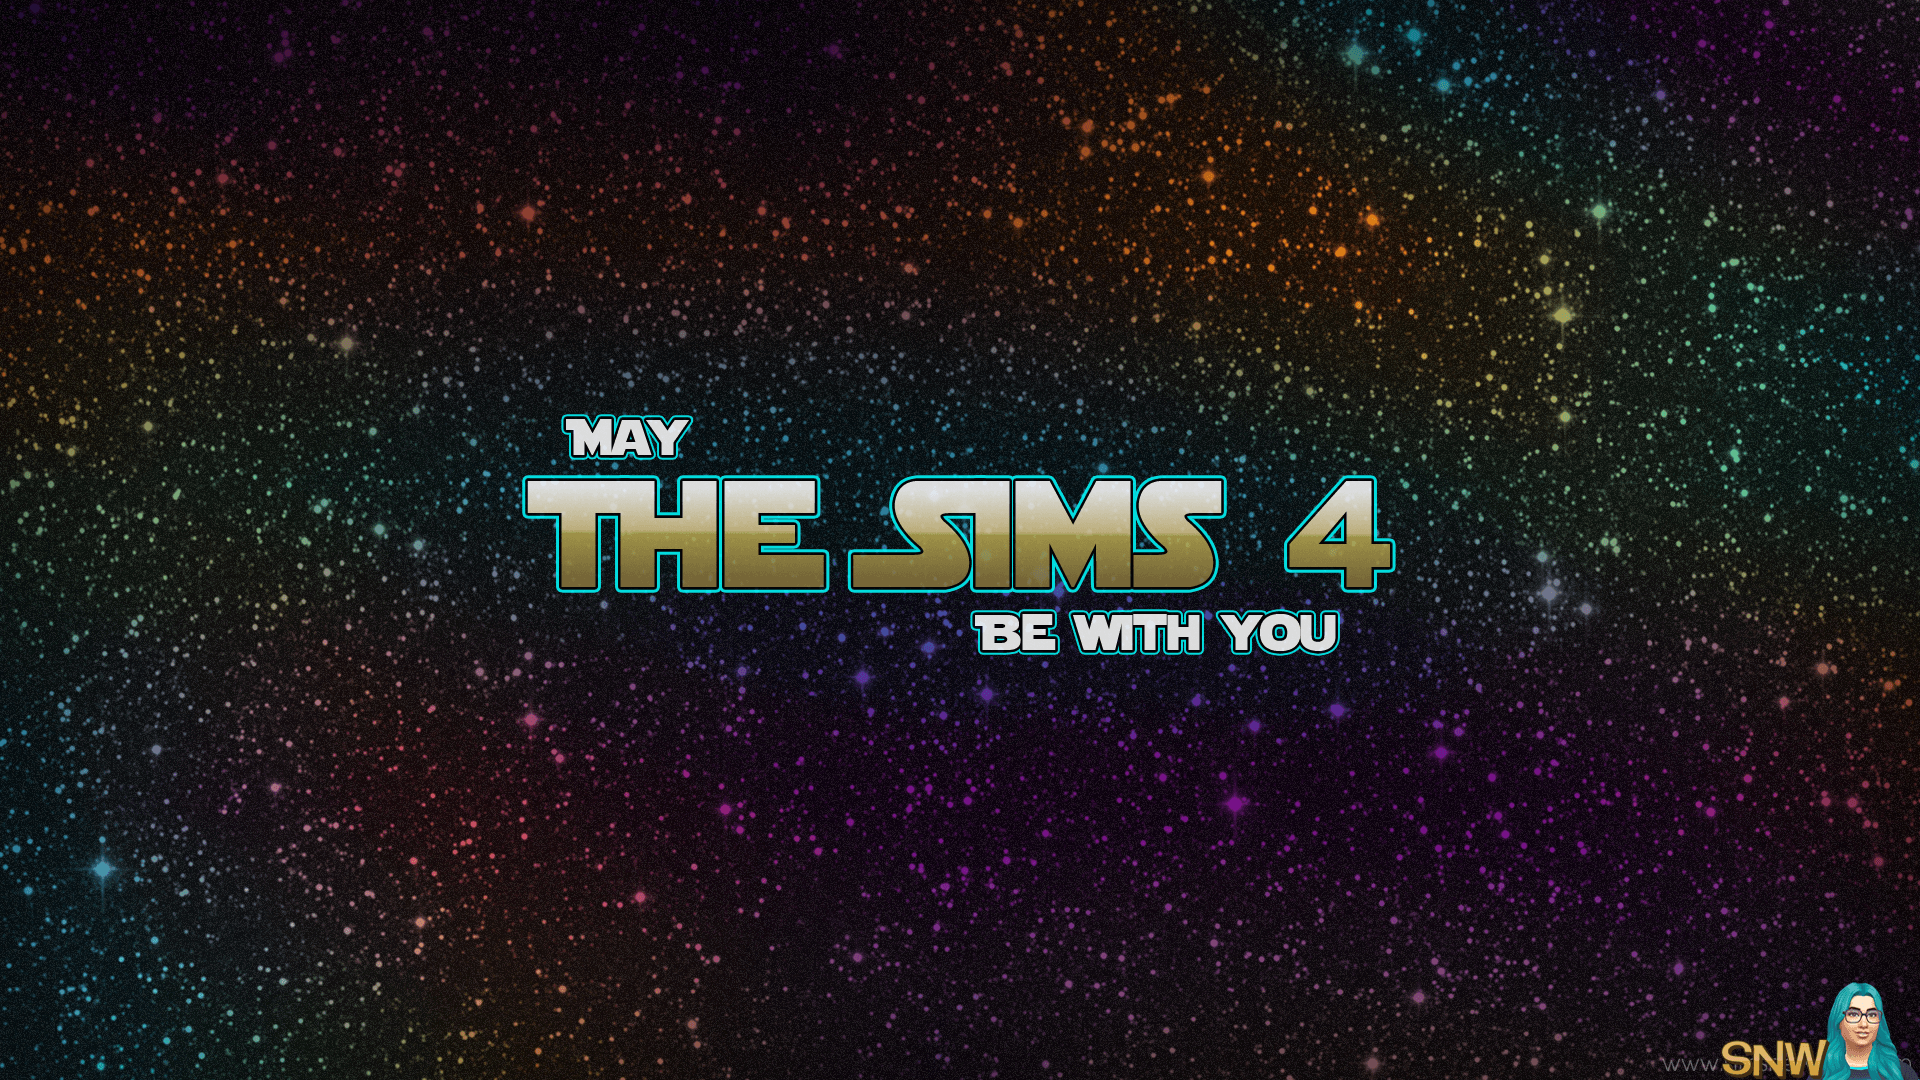 May The Sims 4 Be With You wallpaper